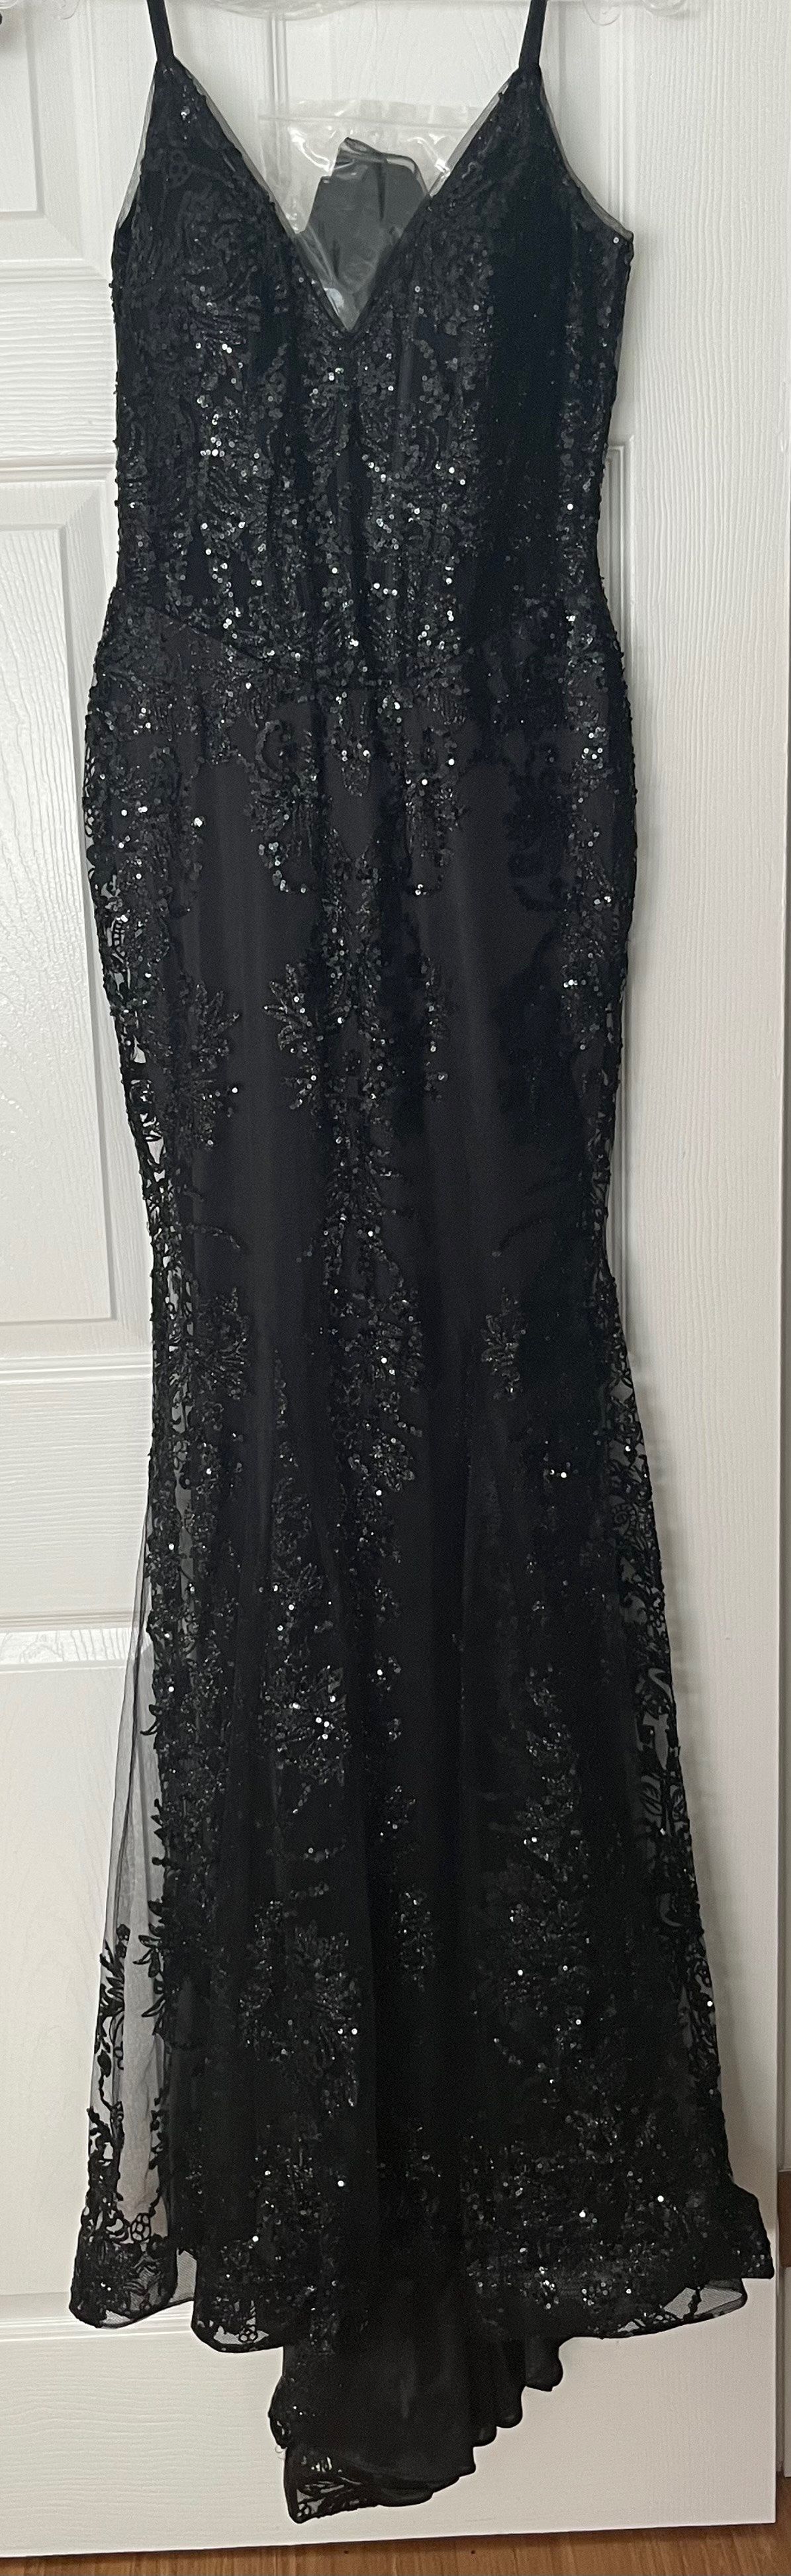 Mia bella couture Size 2 Prom Plunge Black Mermaid Dress on Queenly